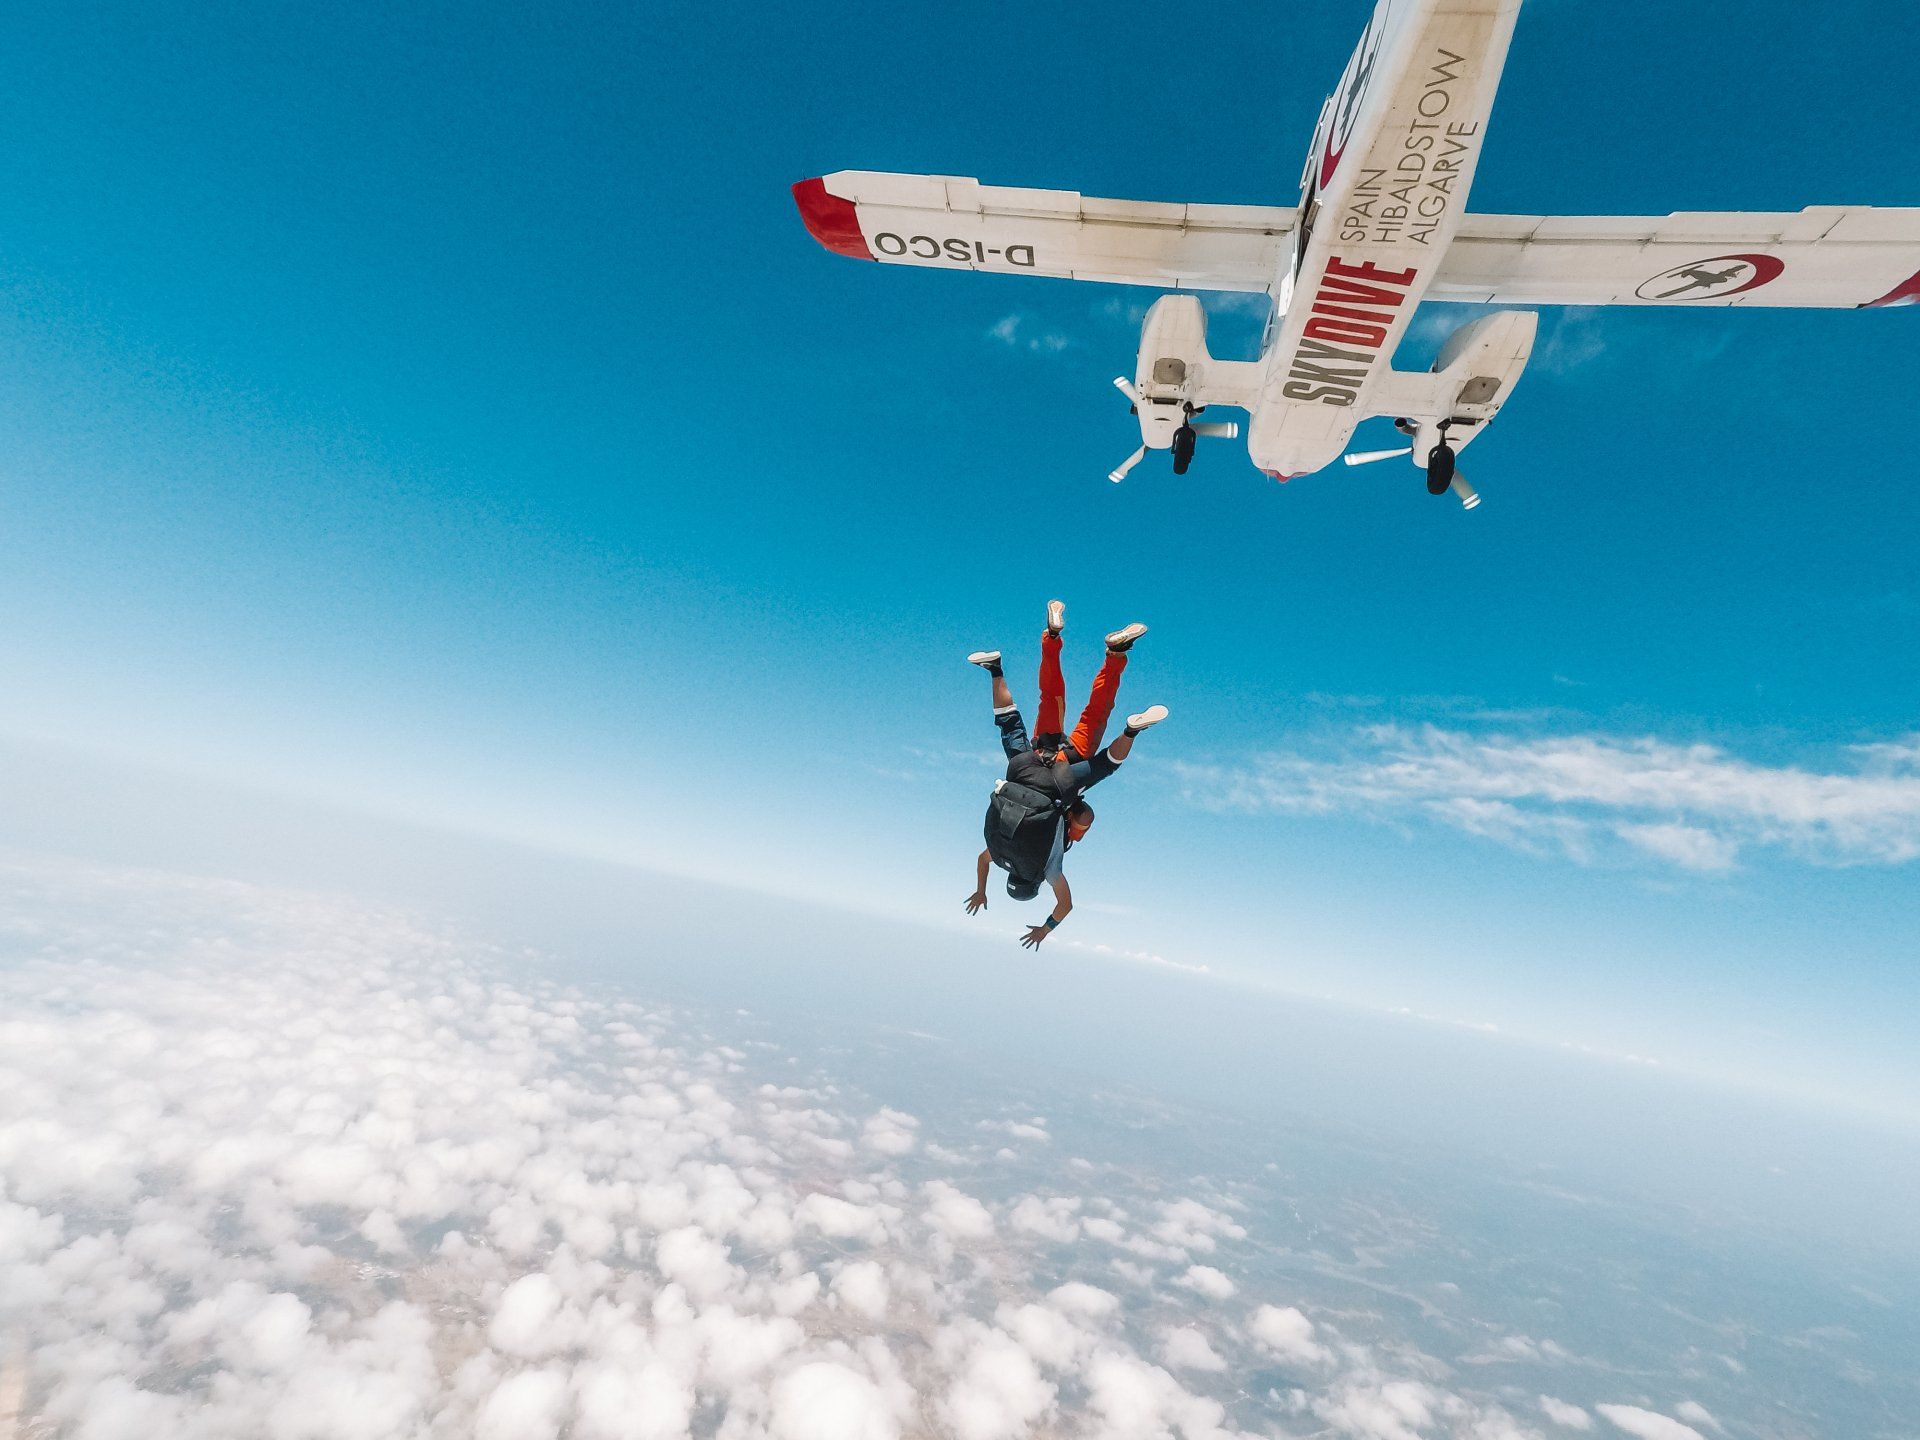 A Trust Experiment in action with people skydiving from a plane